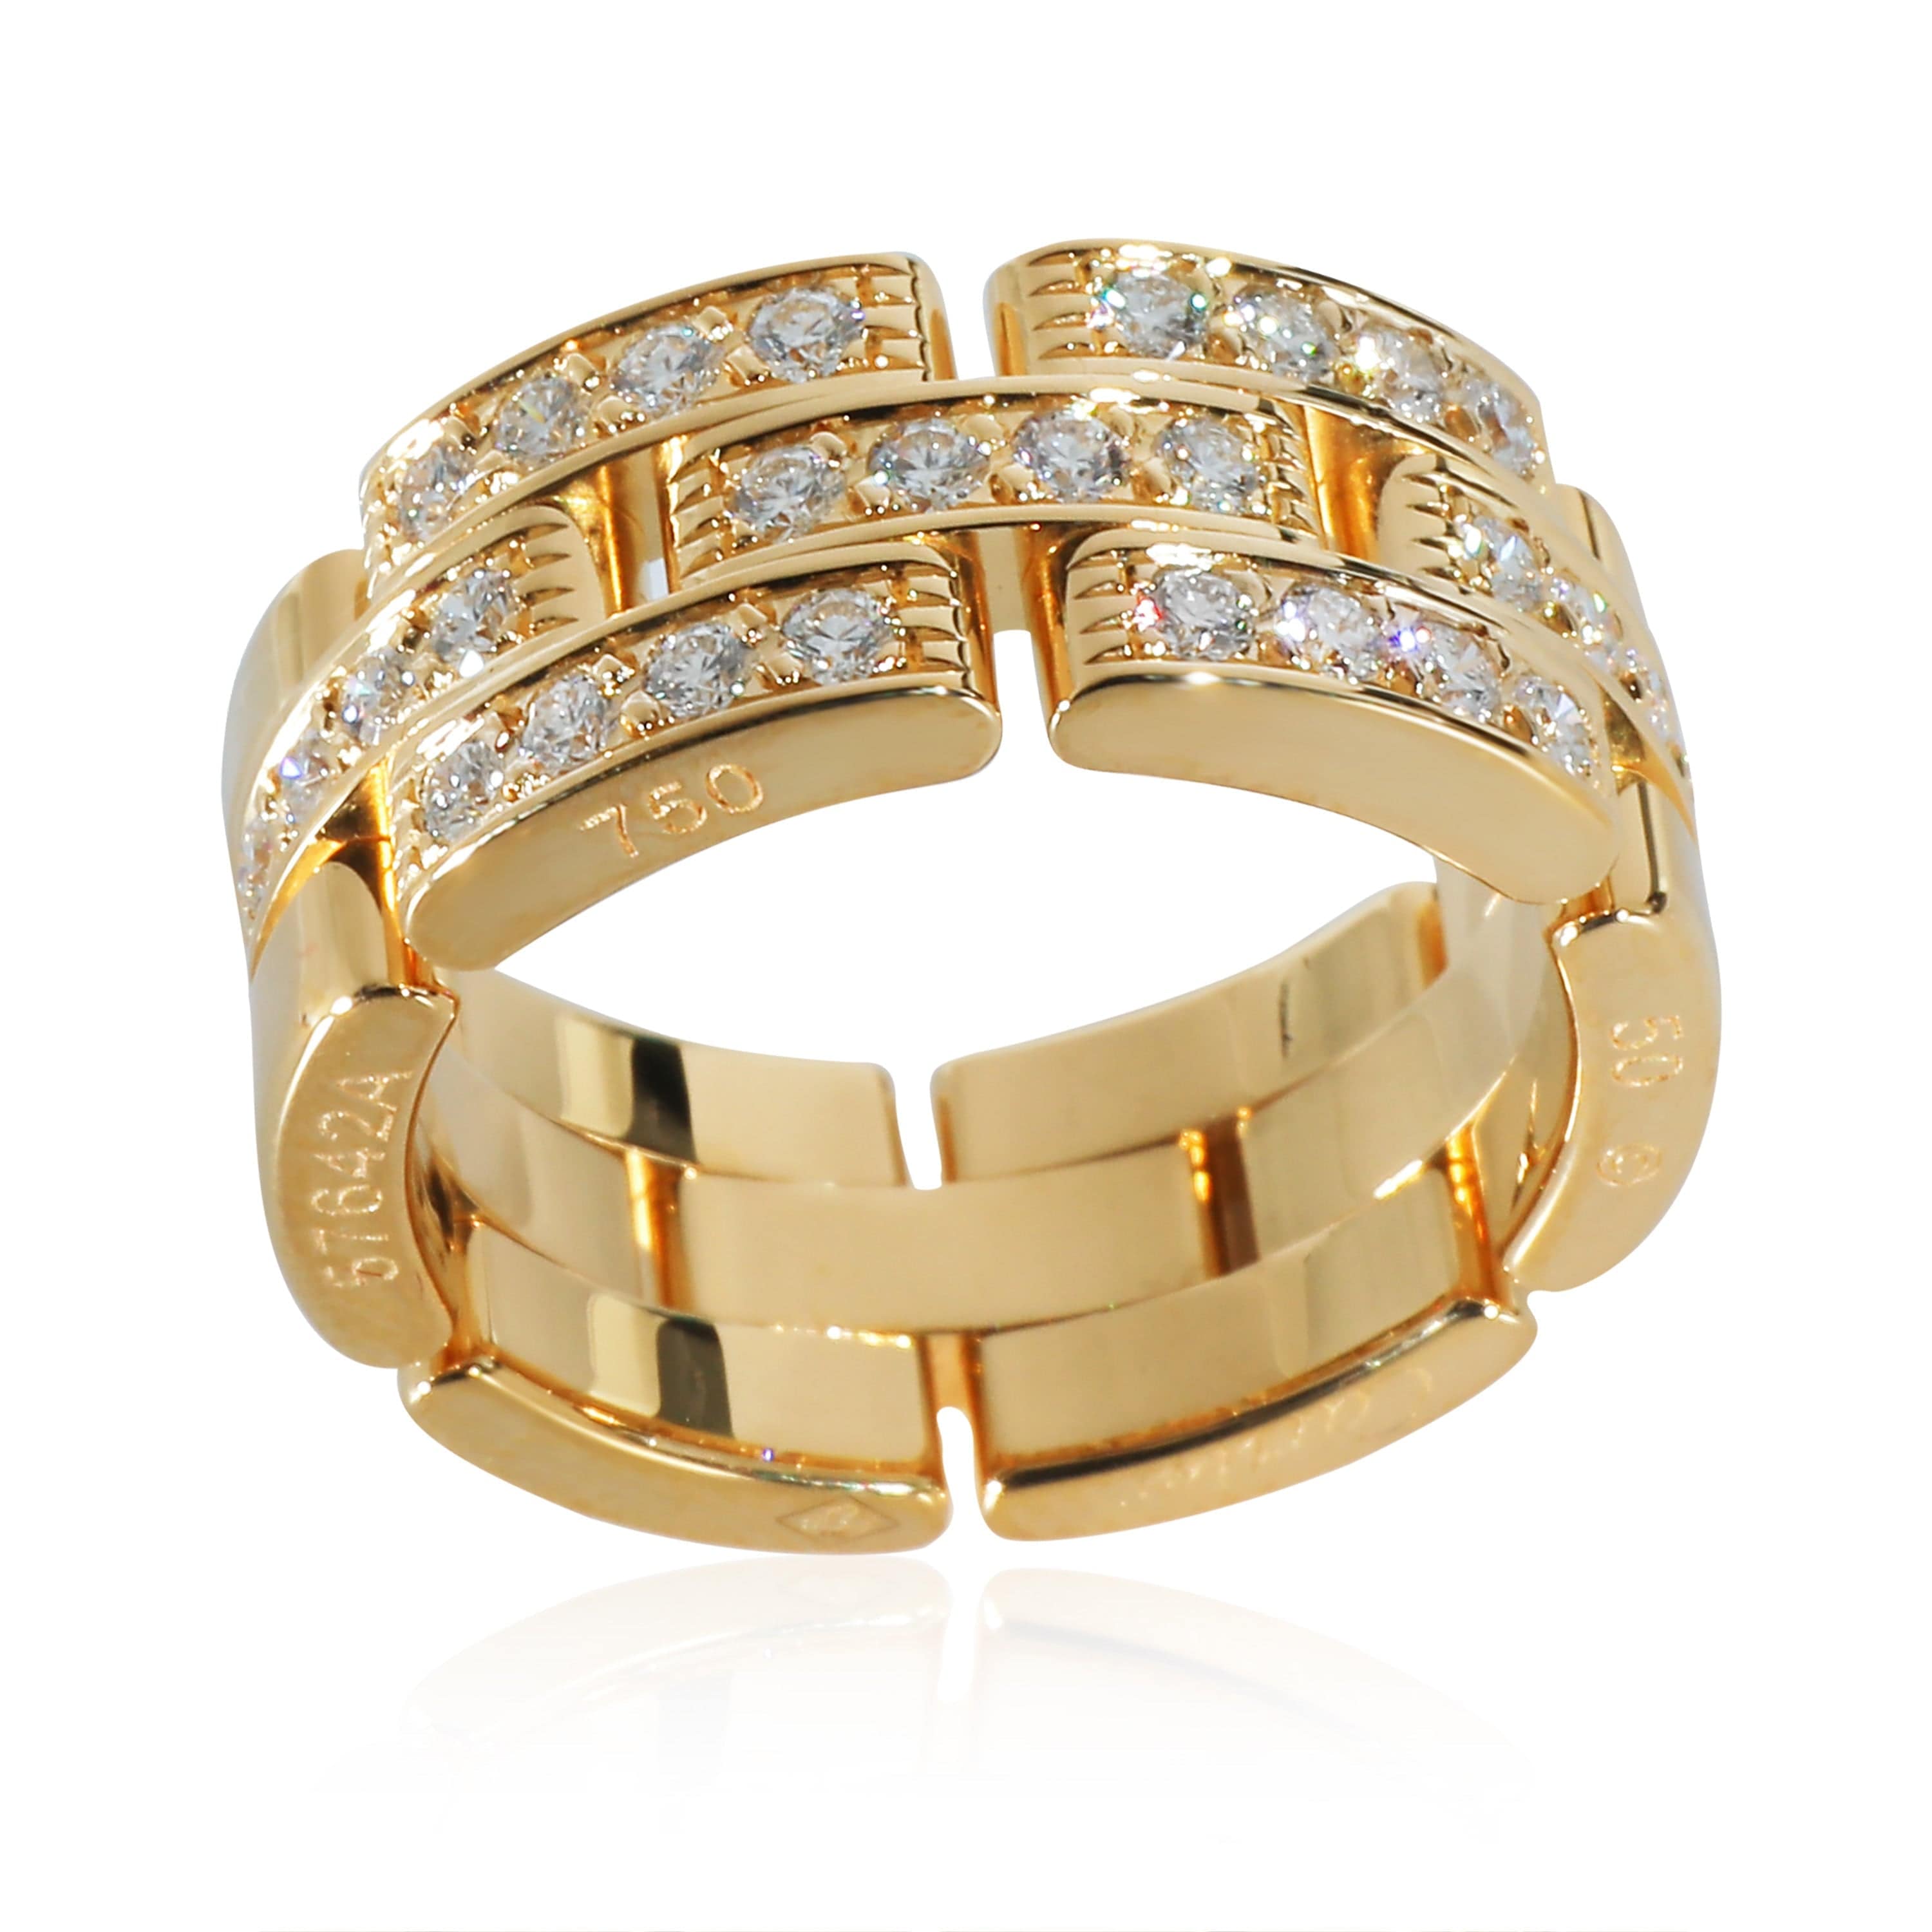 Cartier Cartier Maillon Panthere Band in 18k Yellow Gold 0.53 CTW